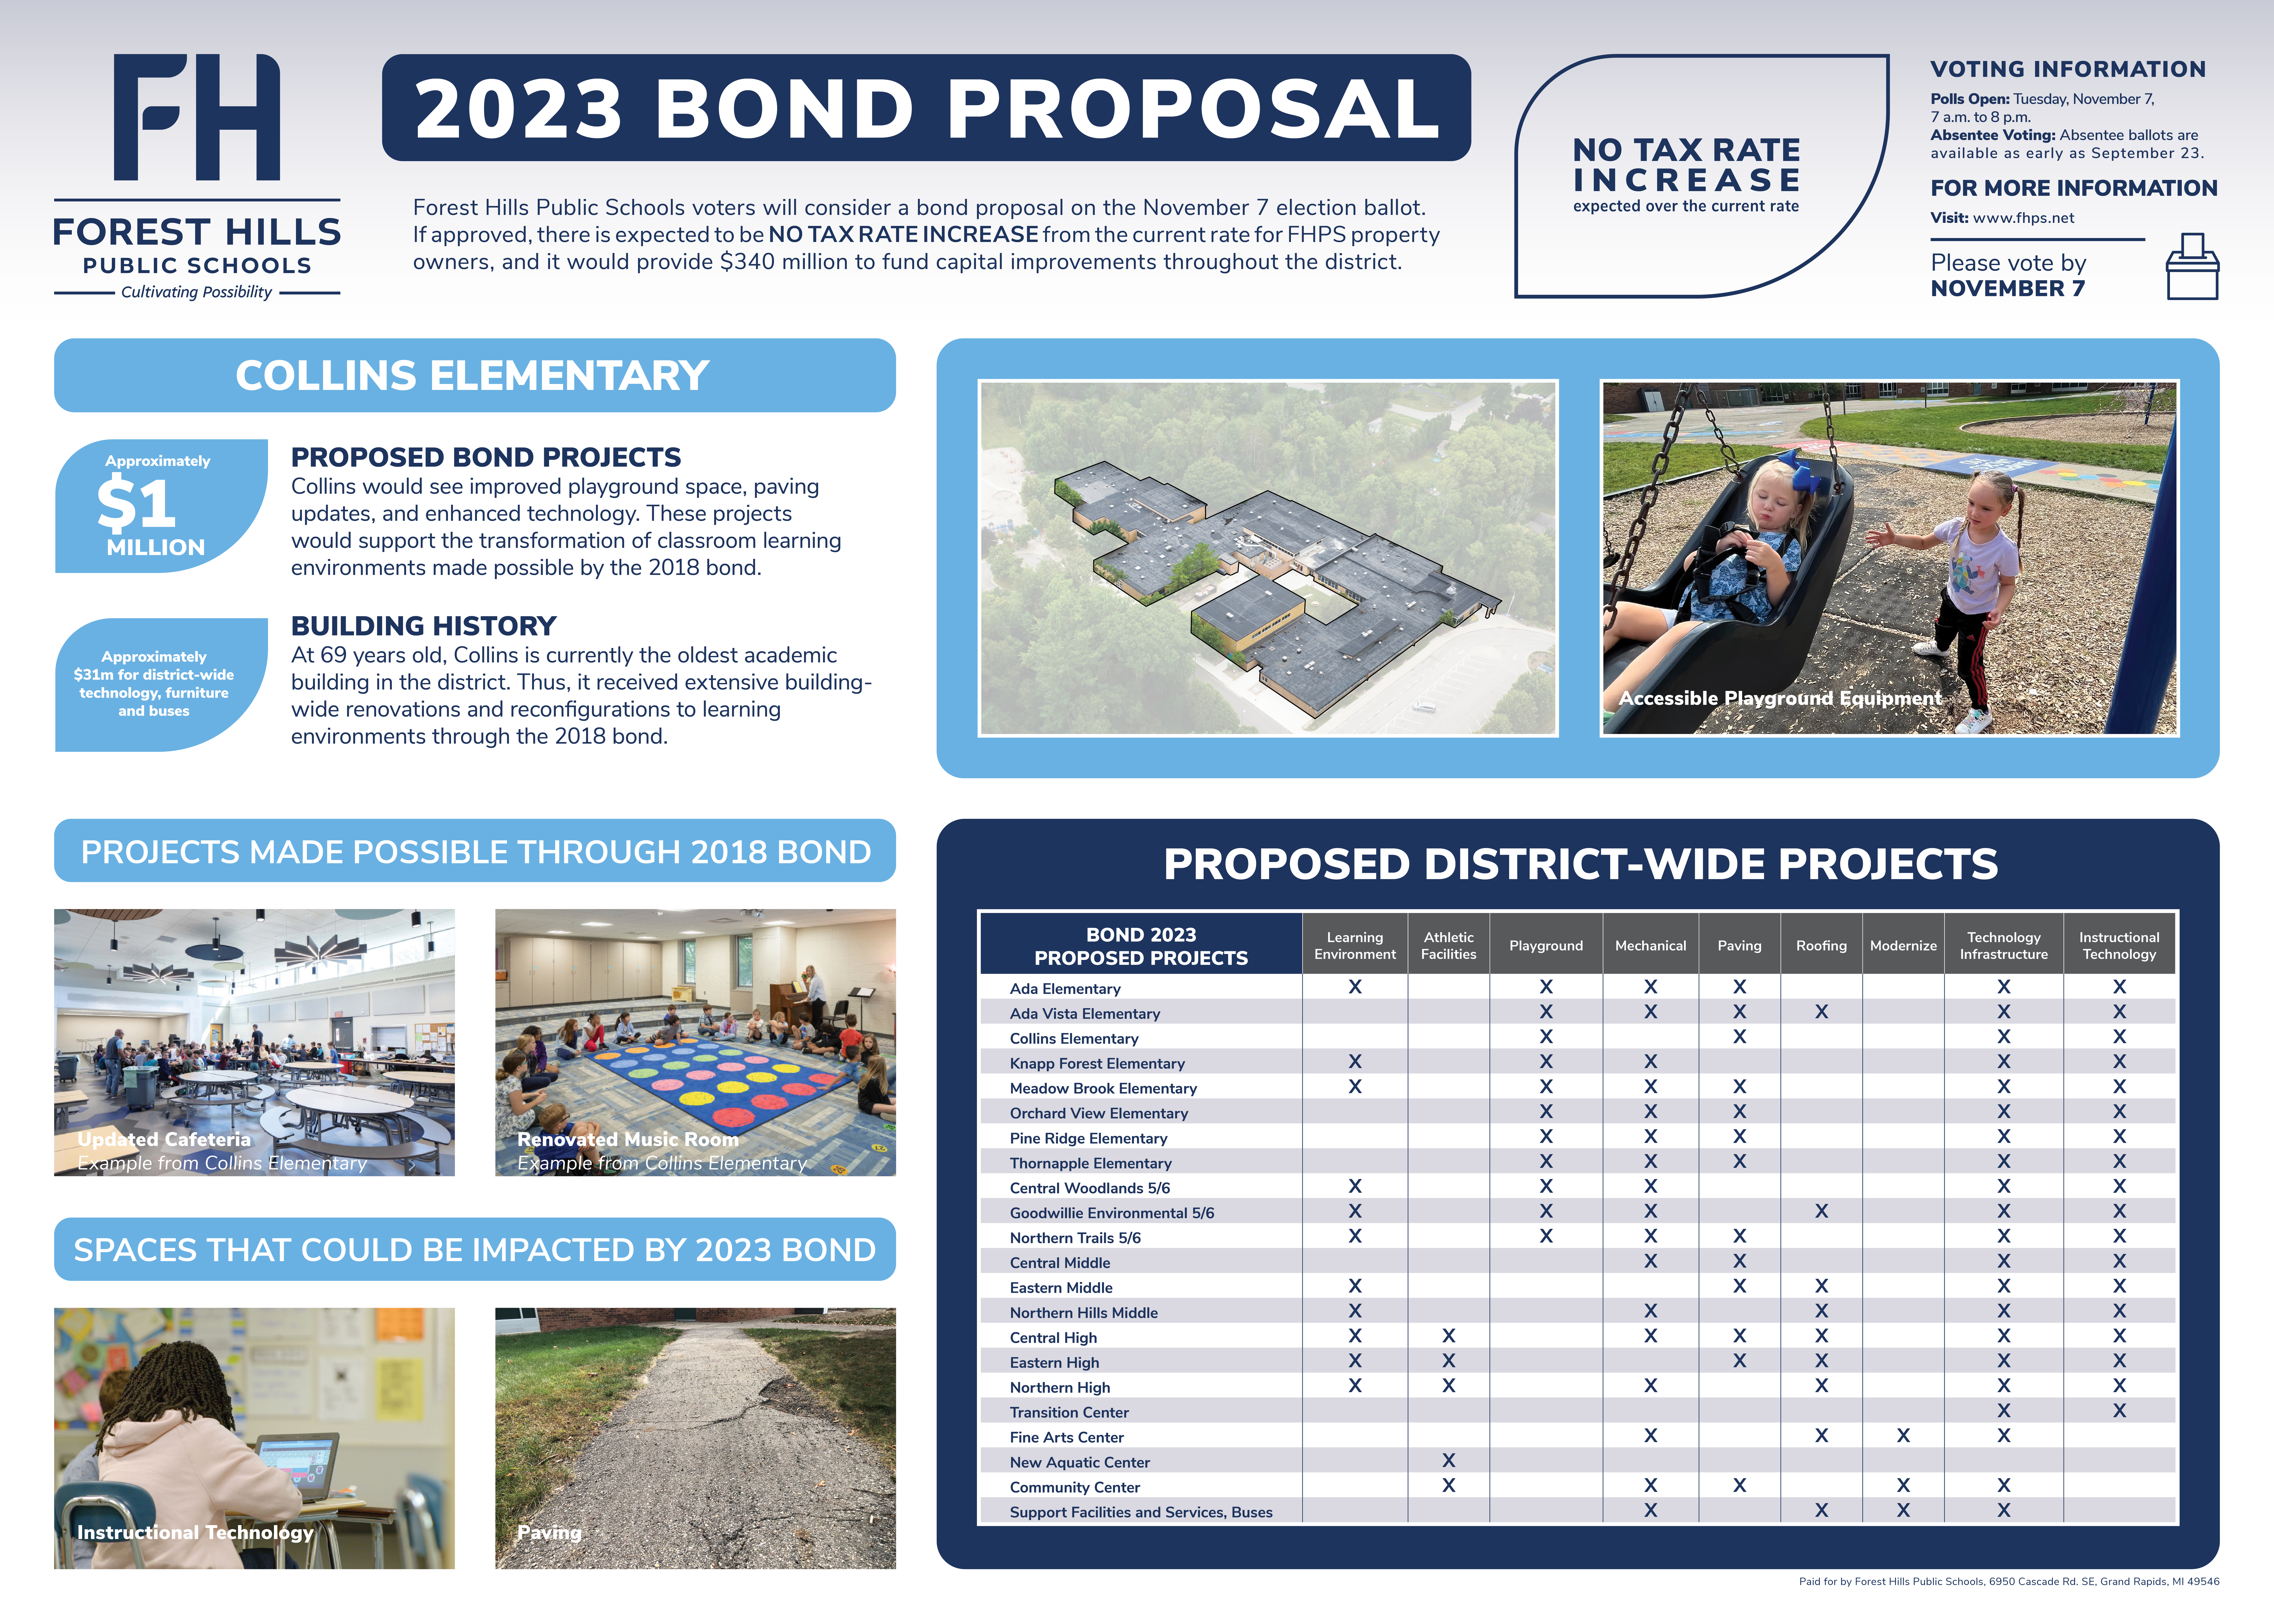 Collins Elementary and pictures of the existing building and bond project pictures from 2018 and spaces that could be impacted by the 2023 bond.